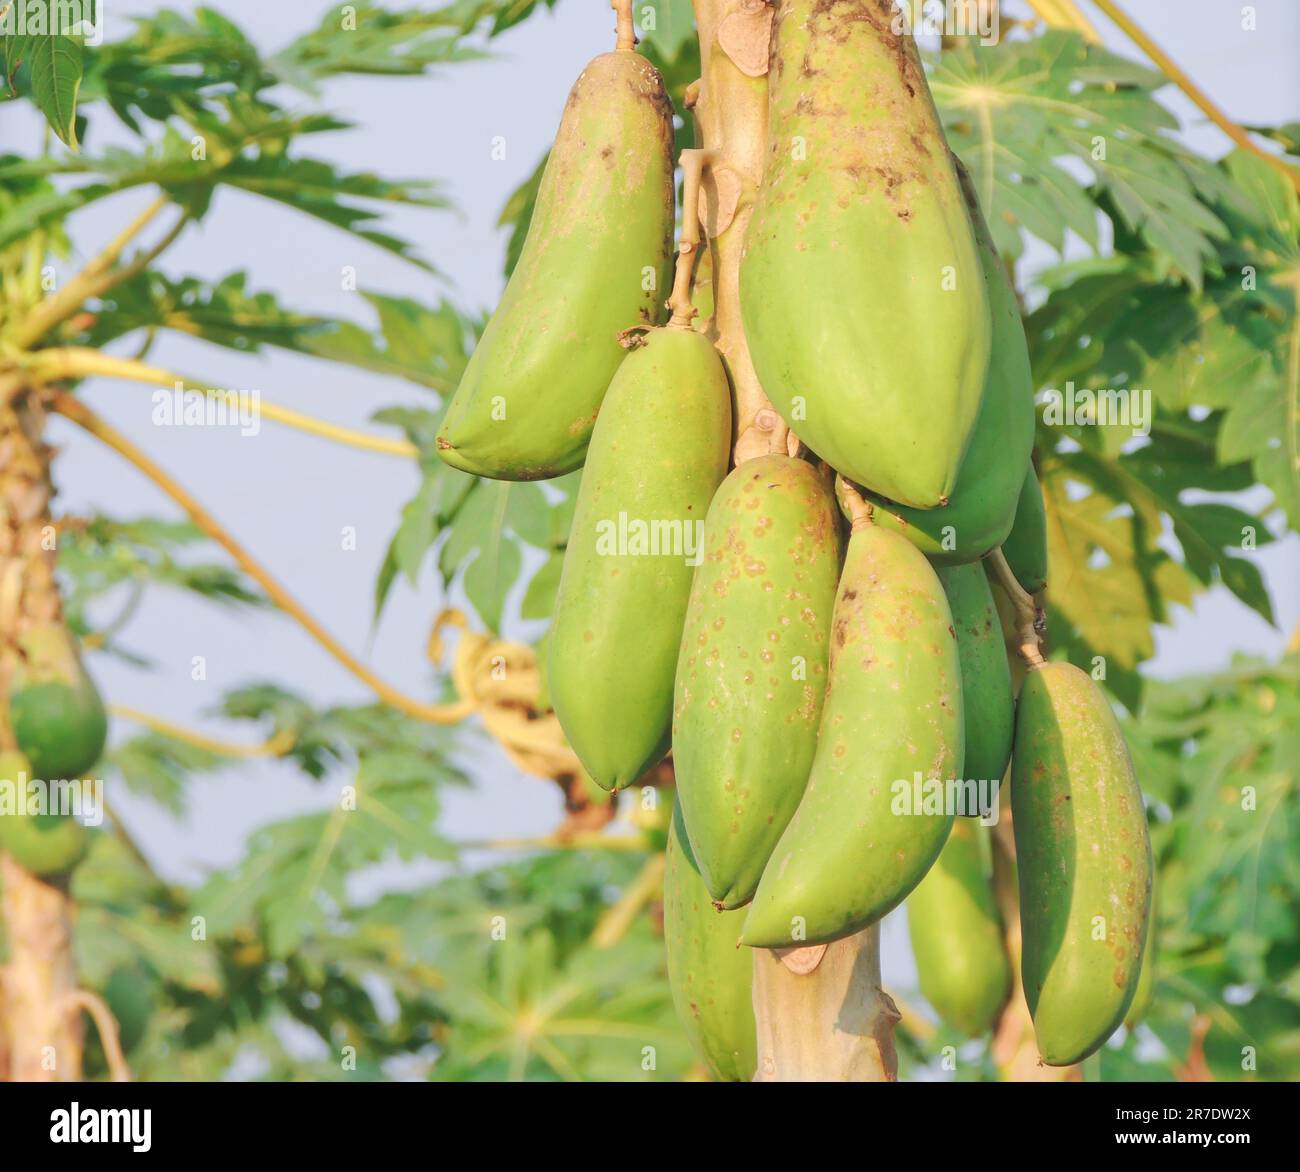 A lush, green tropical tree is laden with ripe yellow bananas, ready for harvest Stock Photo